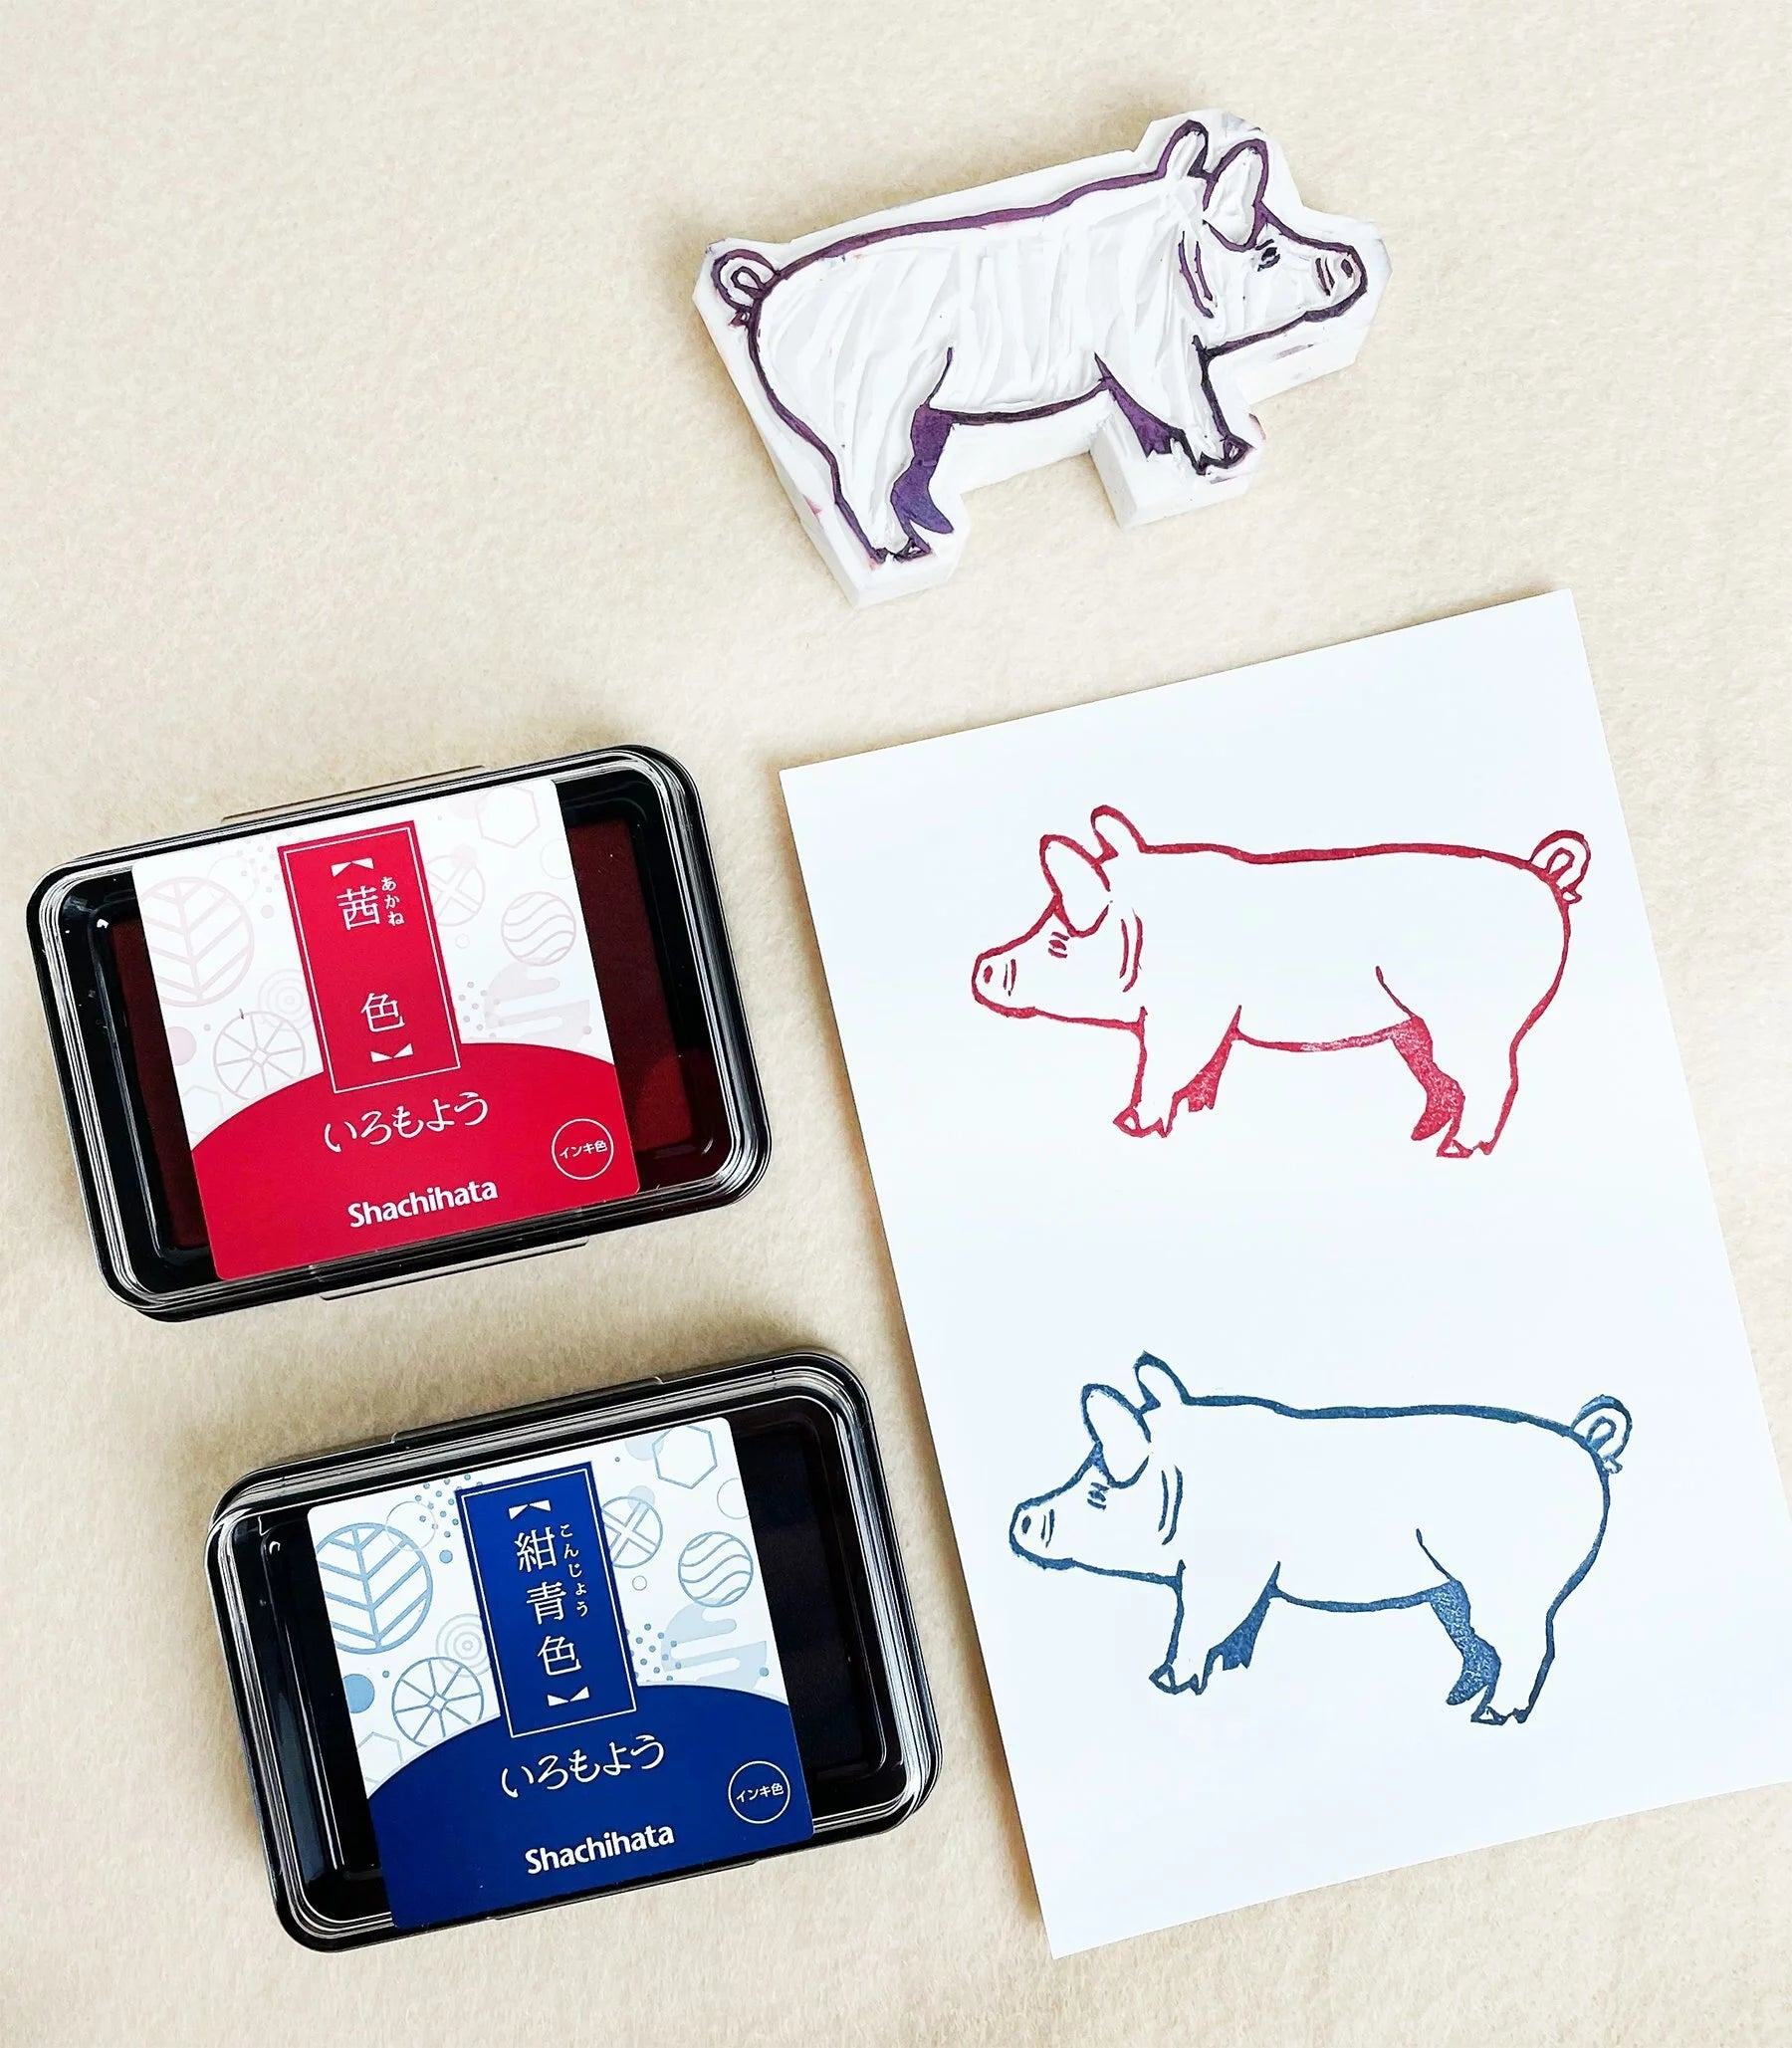 Iromoyo Stamp Pad - 2021 New Color (5 colors) - Techo Treats